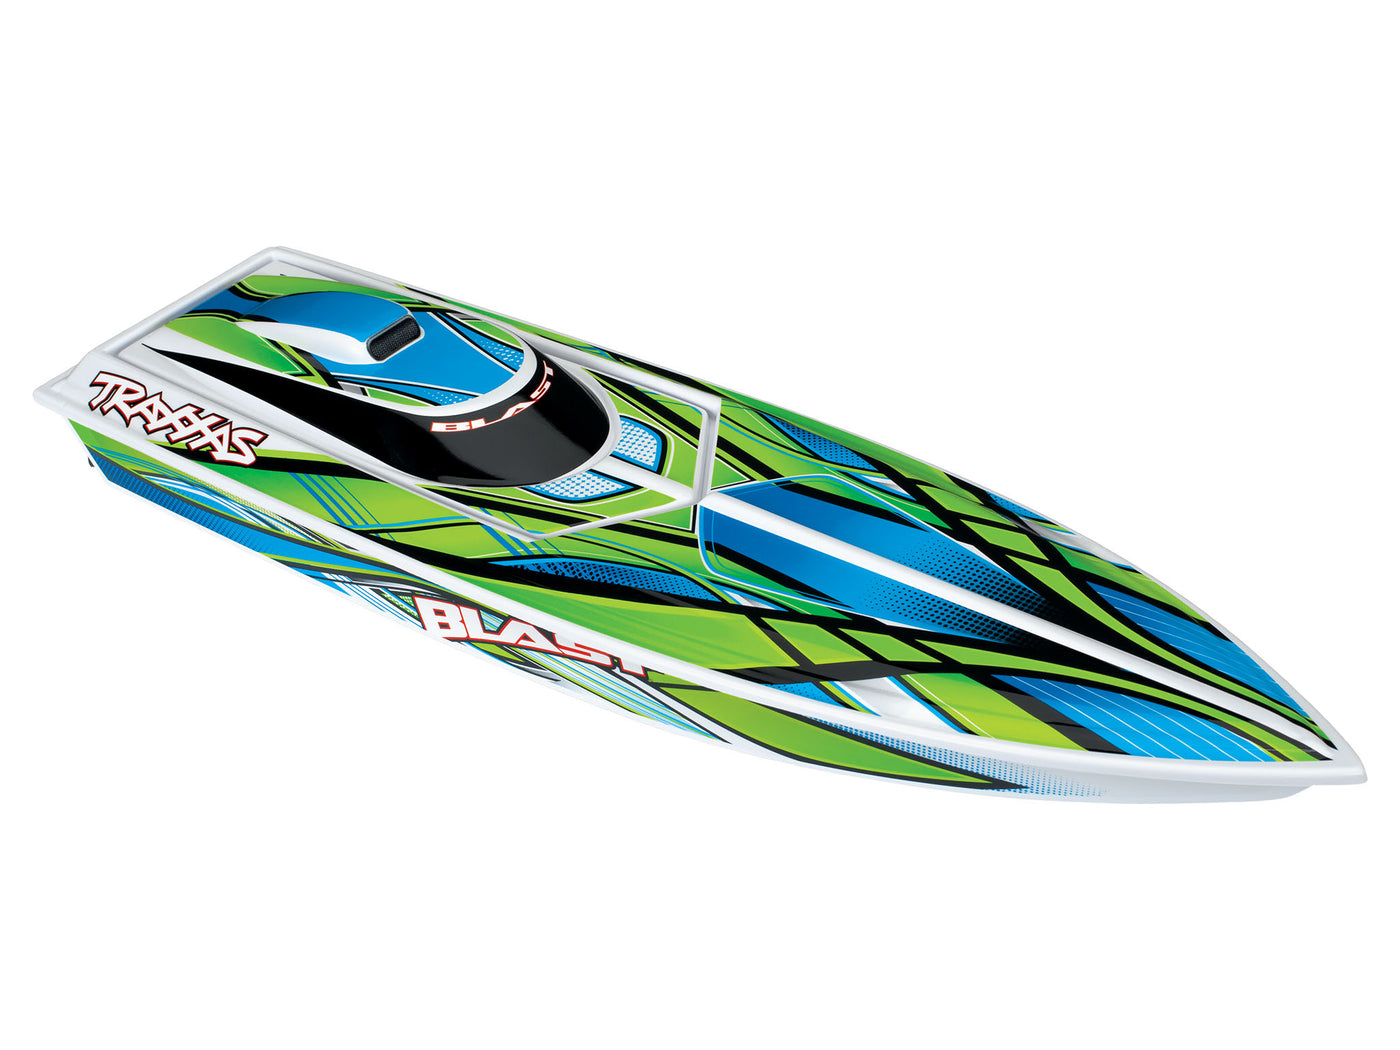 TRA 38104-1 Blast High Performance Race Boat. Ready-To-Race Traxxas